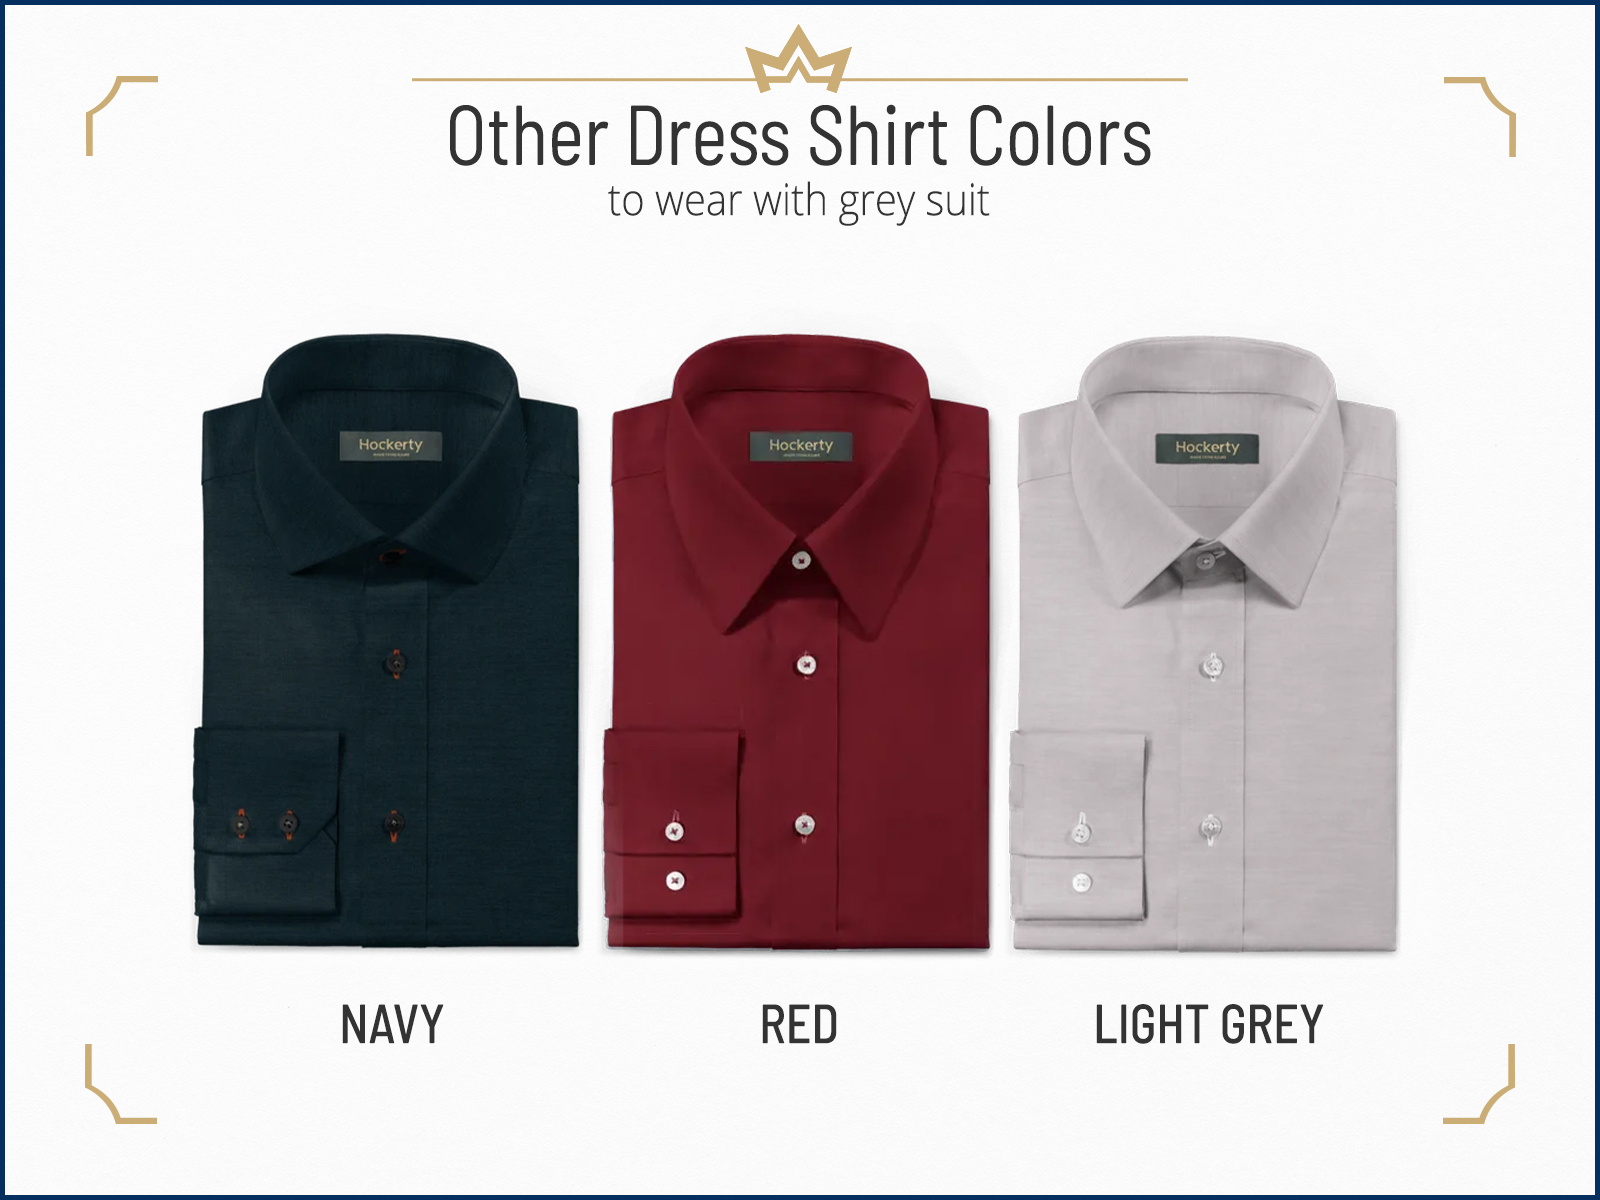 Other recommended dress shirt colors for grey suits: navy vs. red vs. grey shirts